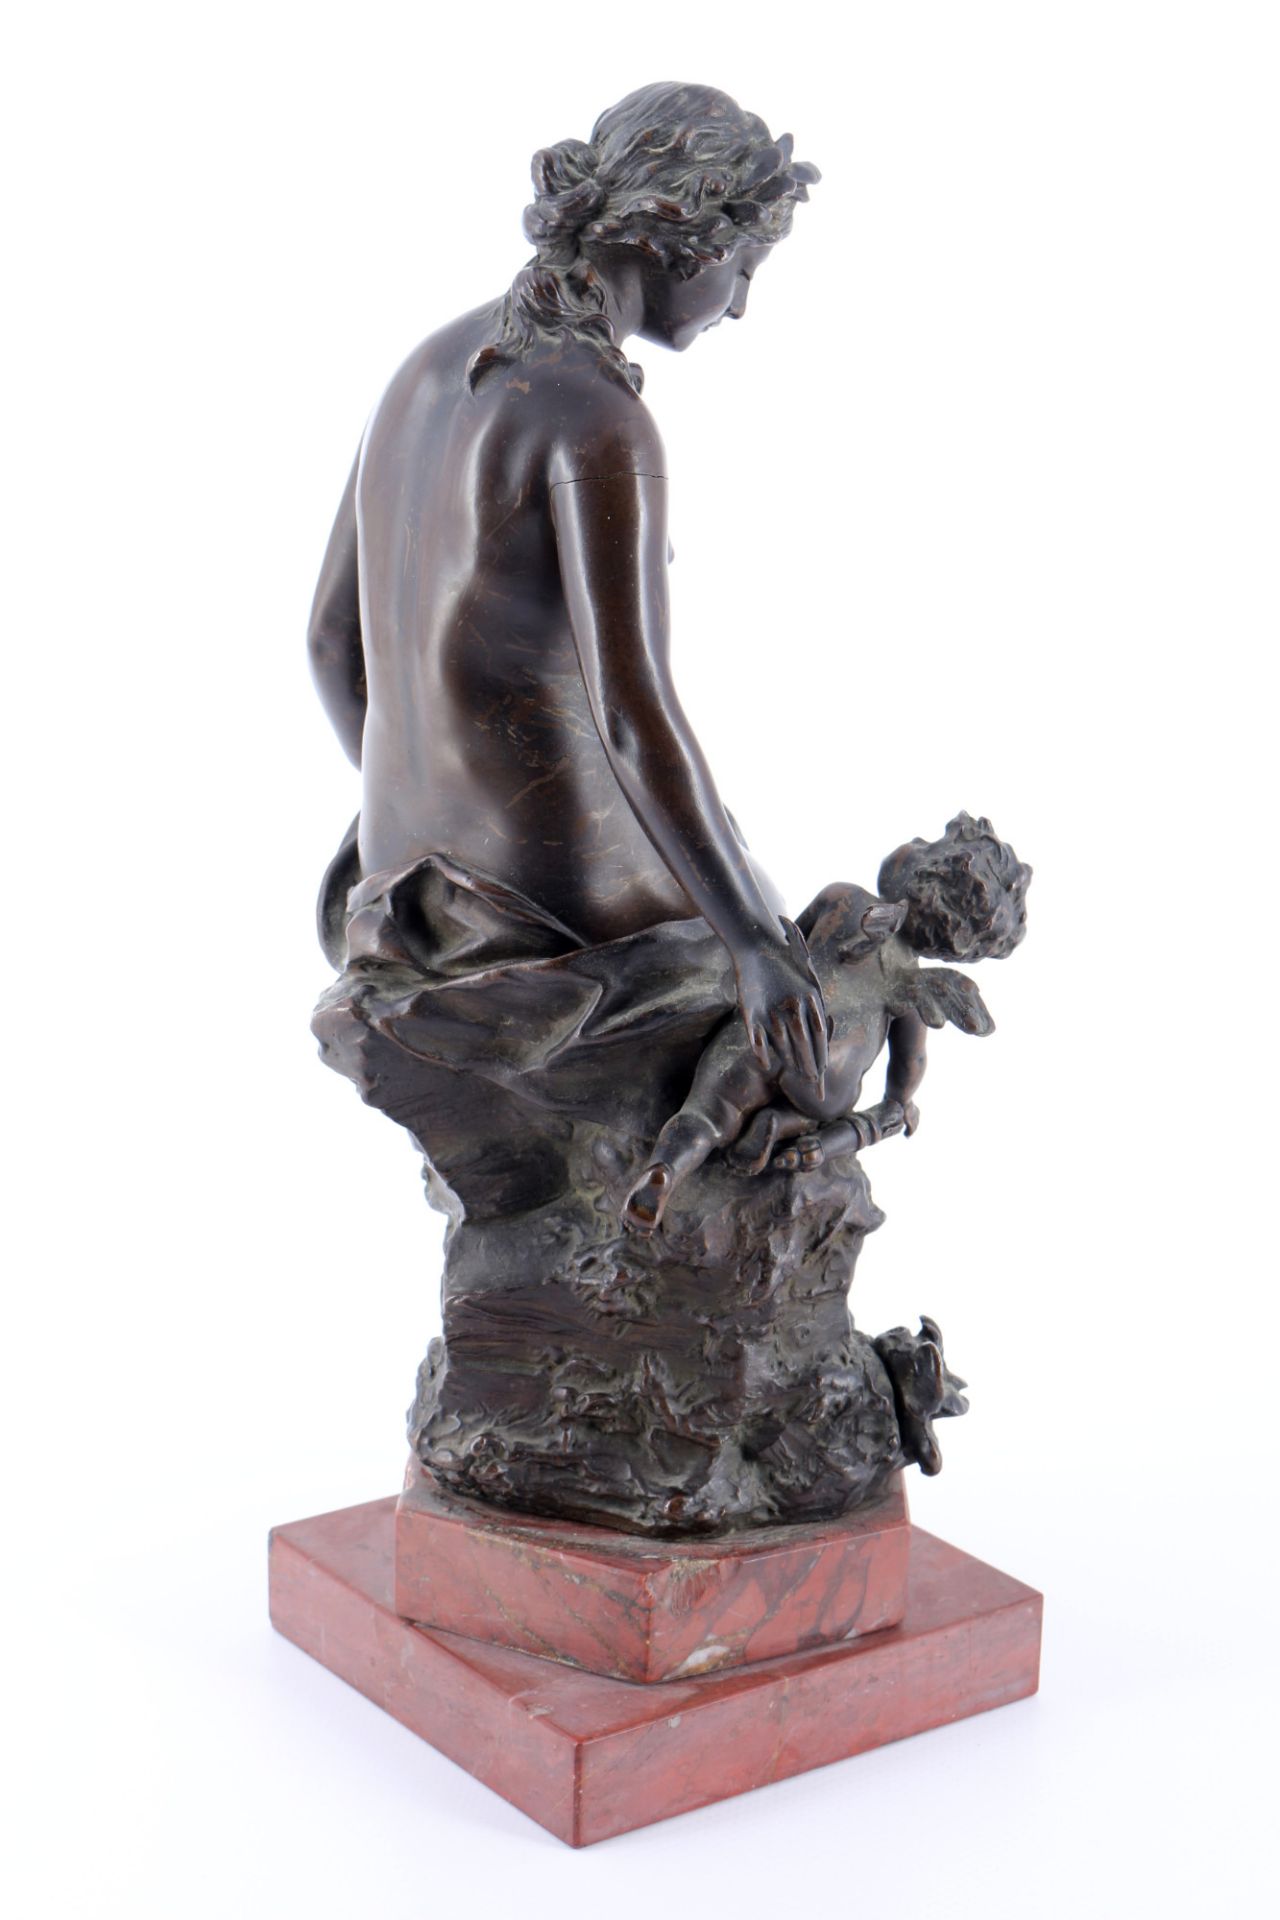 19th century sculptor, J. NEELS, female nude with Cupid, Frauenakt mit Amor - Image 3 of 6